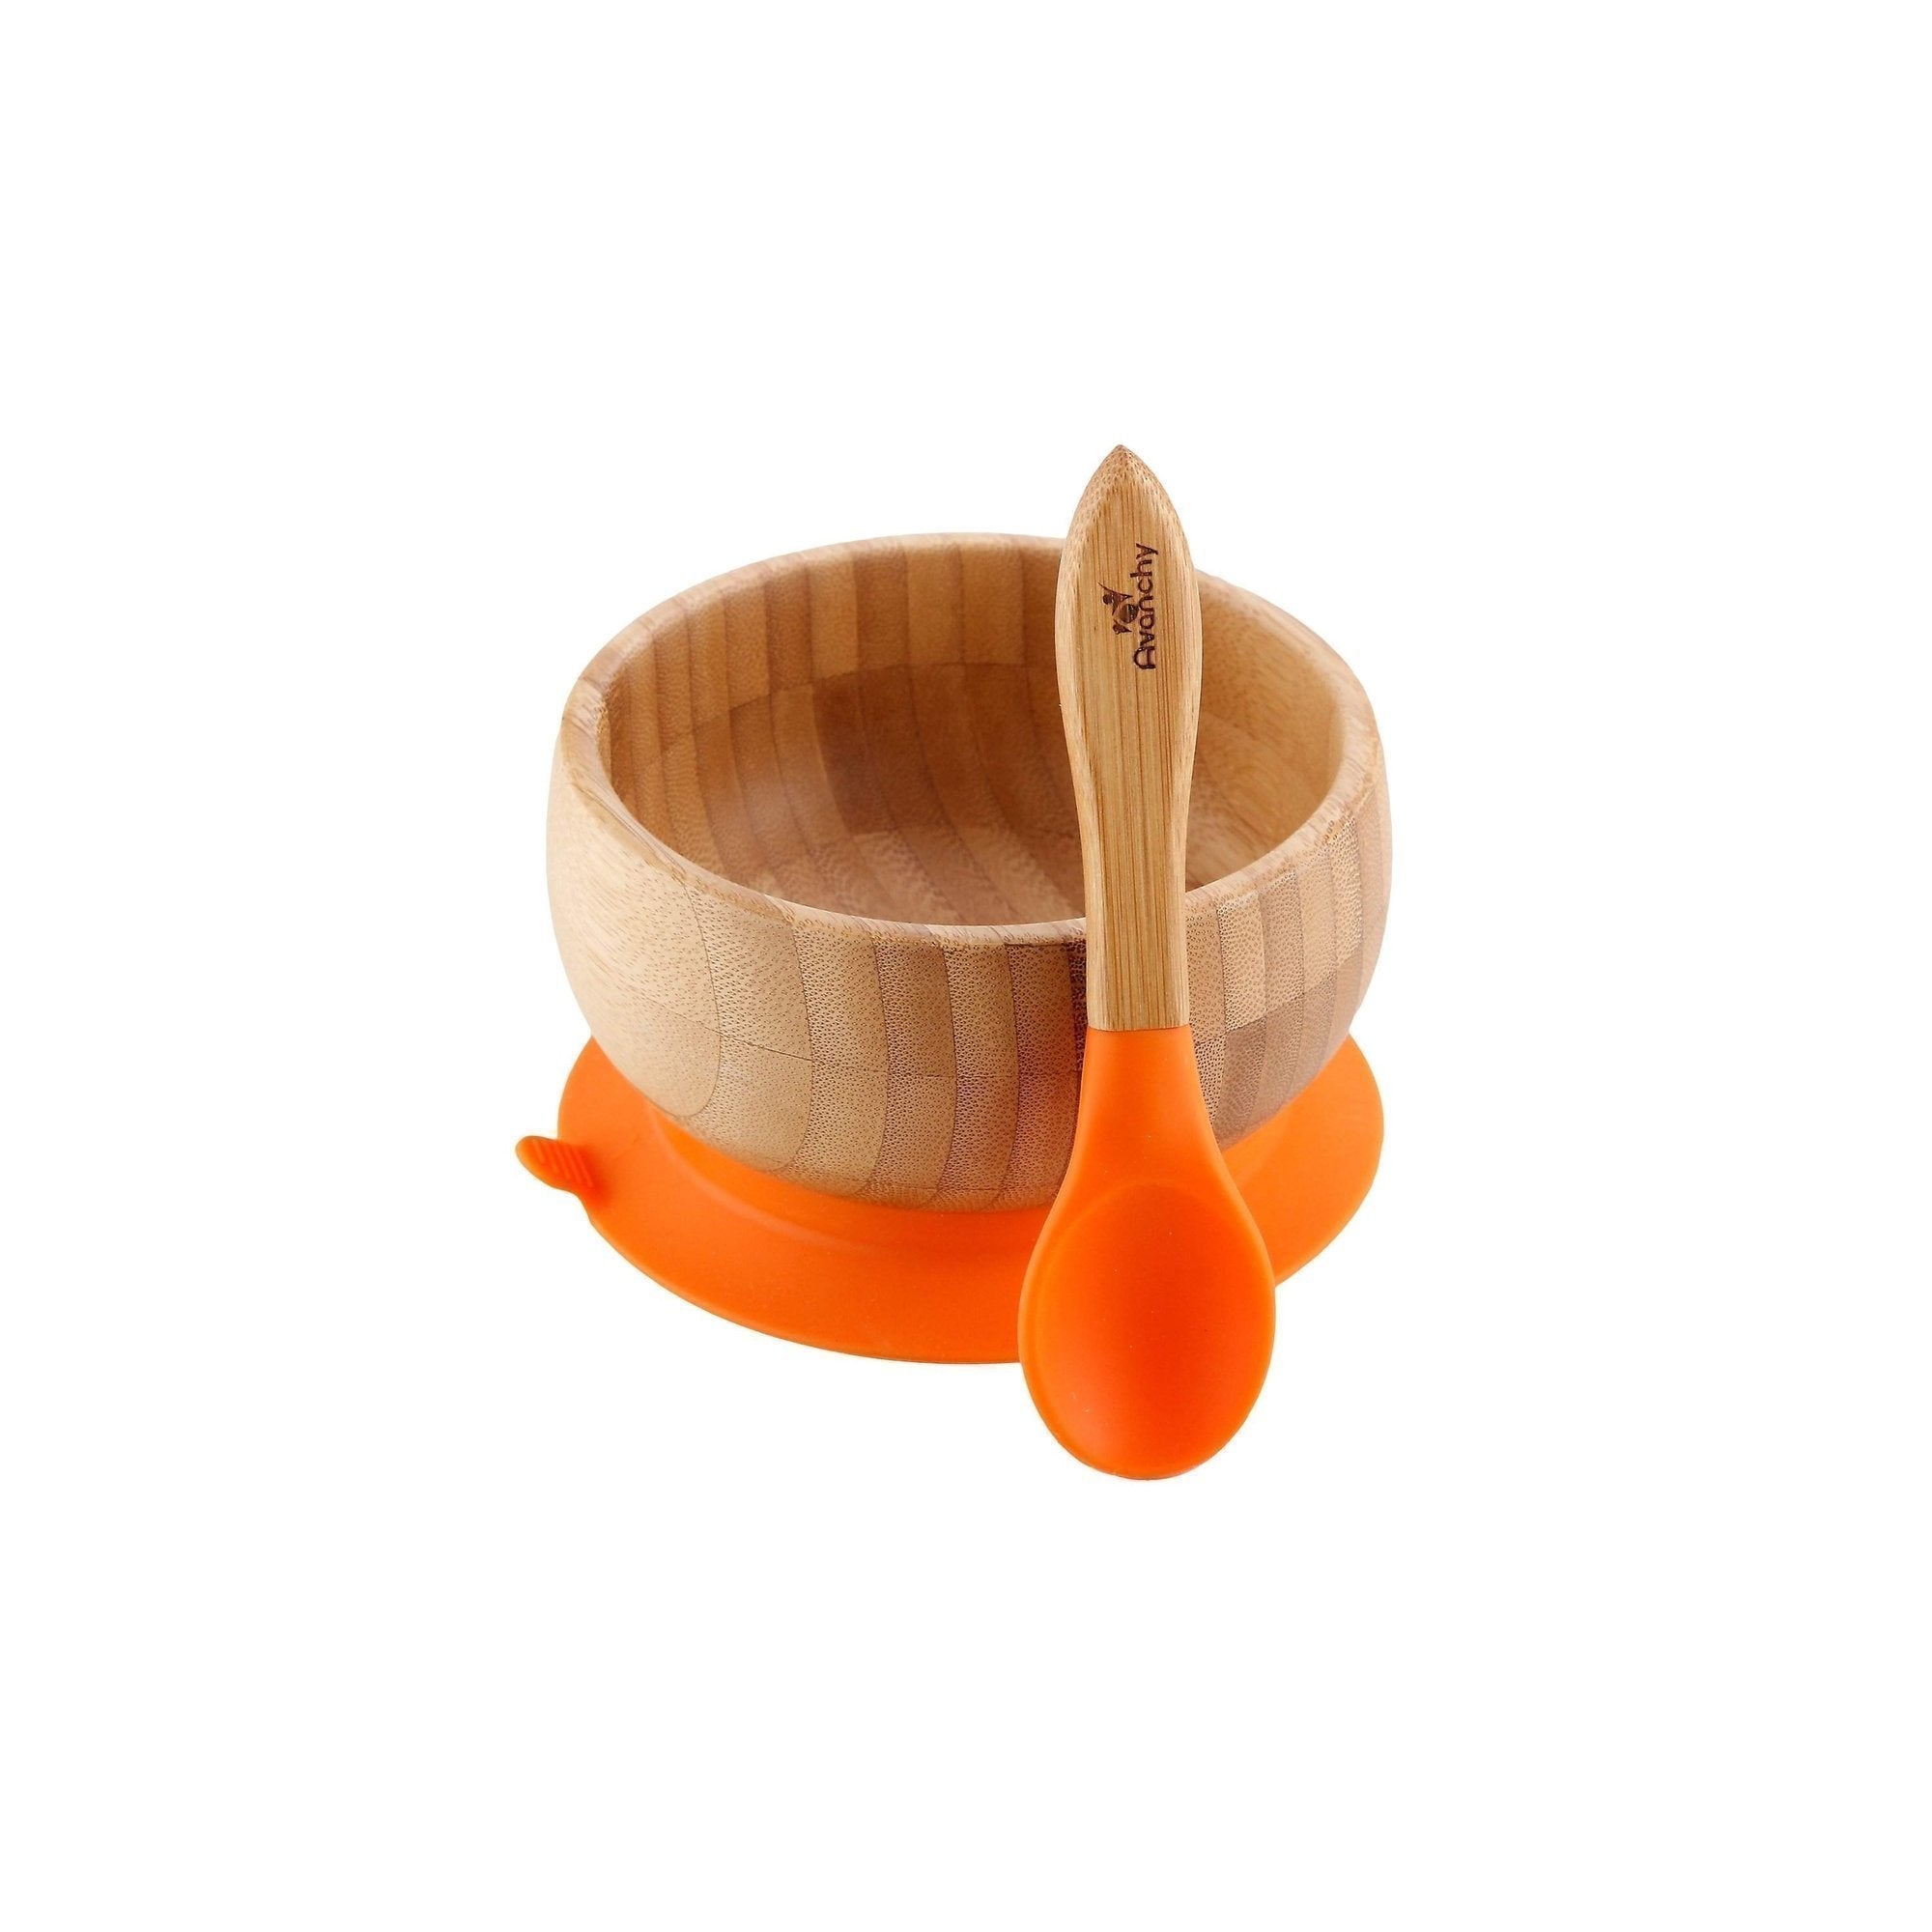 Bamboo Baby Suction Bowl & Spoon – Natural Resources: Pregnancy + Parenting